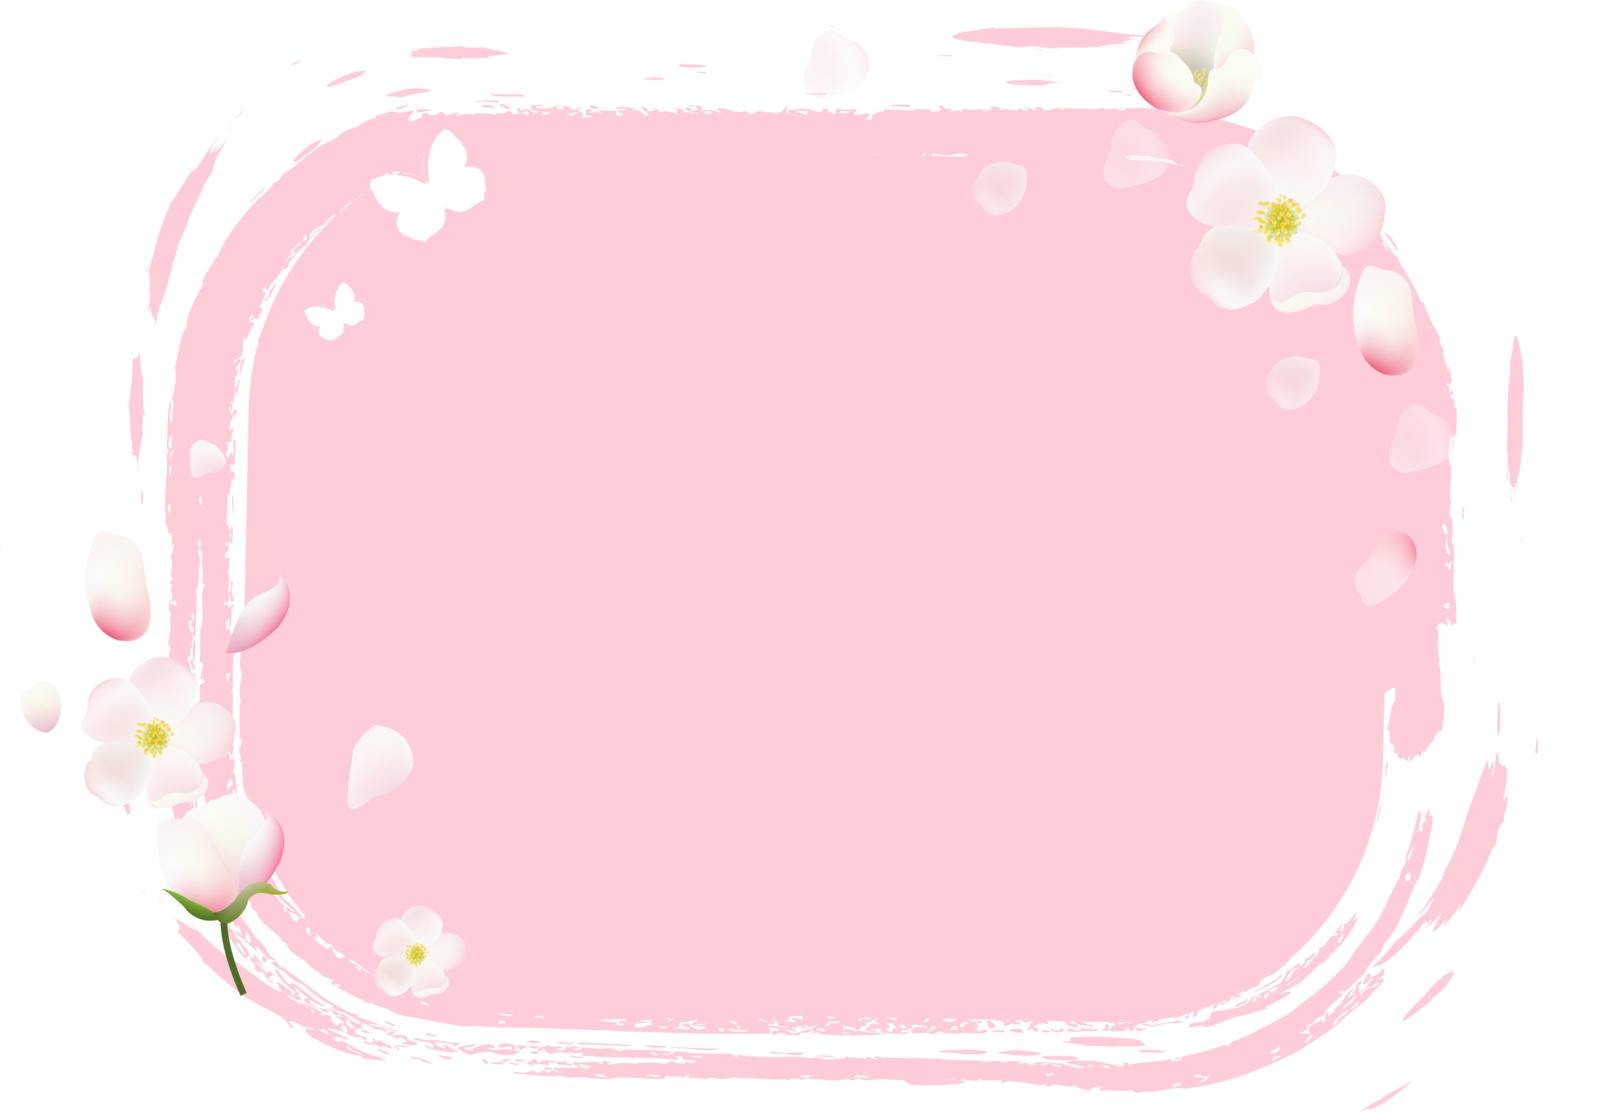 Pink Stain With Flowers Gradient Mesh, Vector Illustration